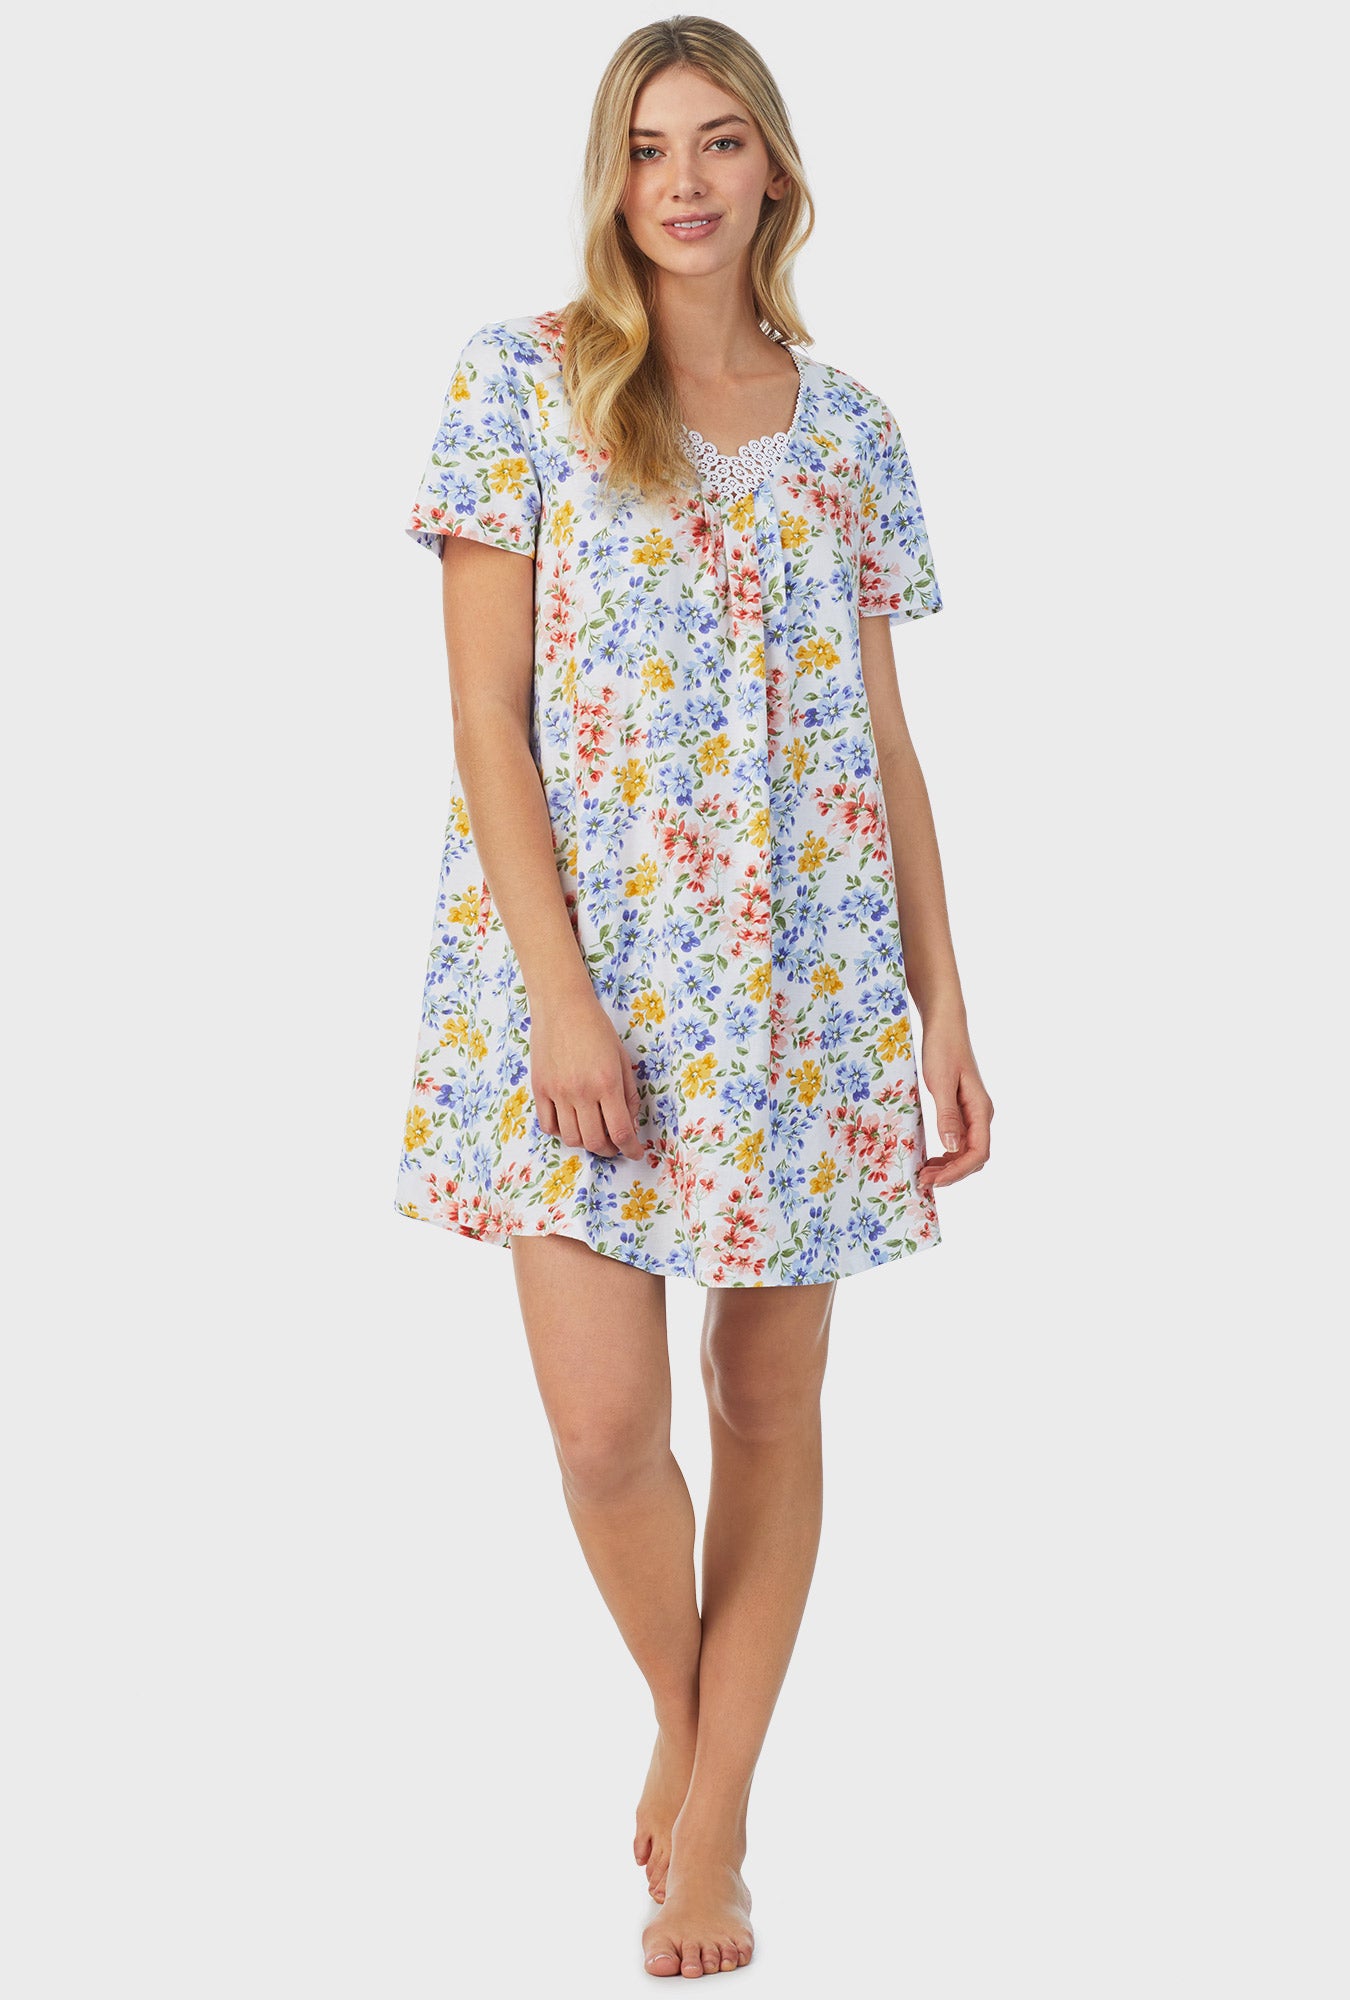 A lady wearing short sleeve short nightgown with multi floral print.